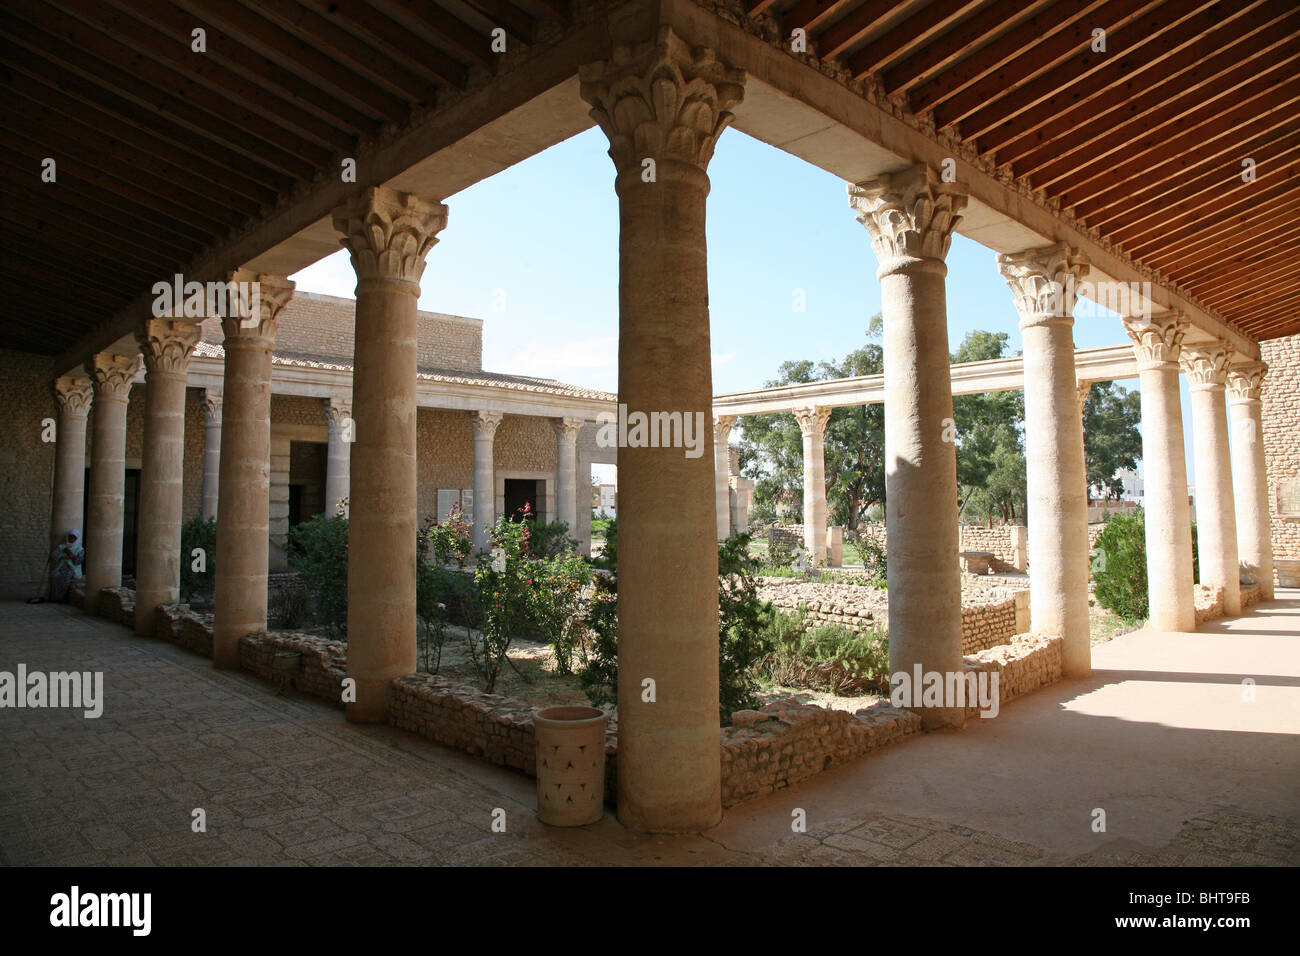 The Maison d'Africa, a Roman Villa remains at El Jem, Tunisia, North Africa in the process of being restored Stock Photo